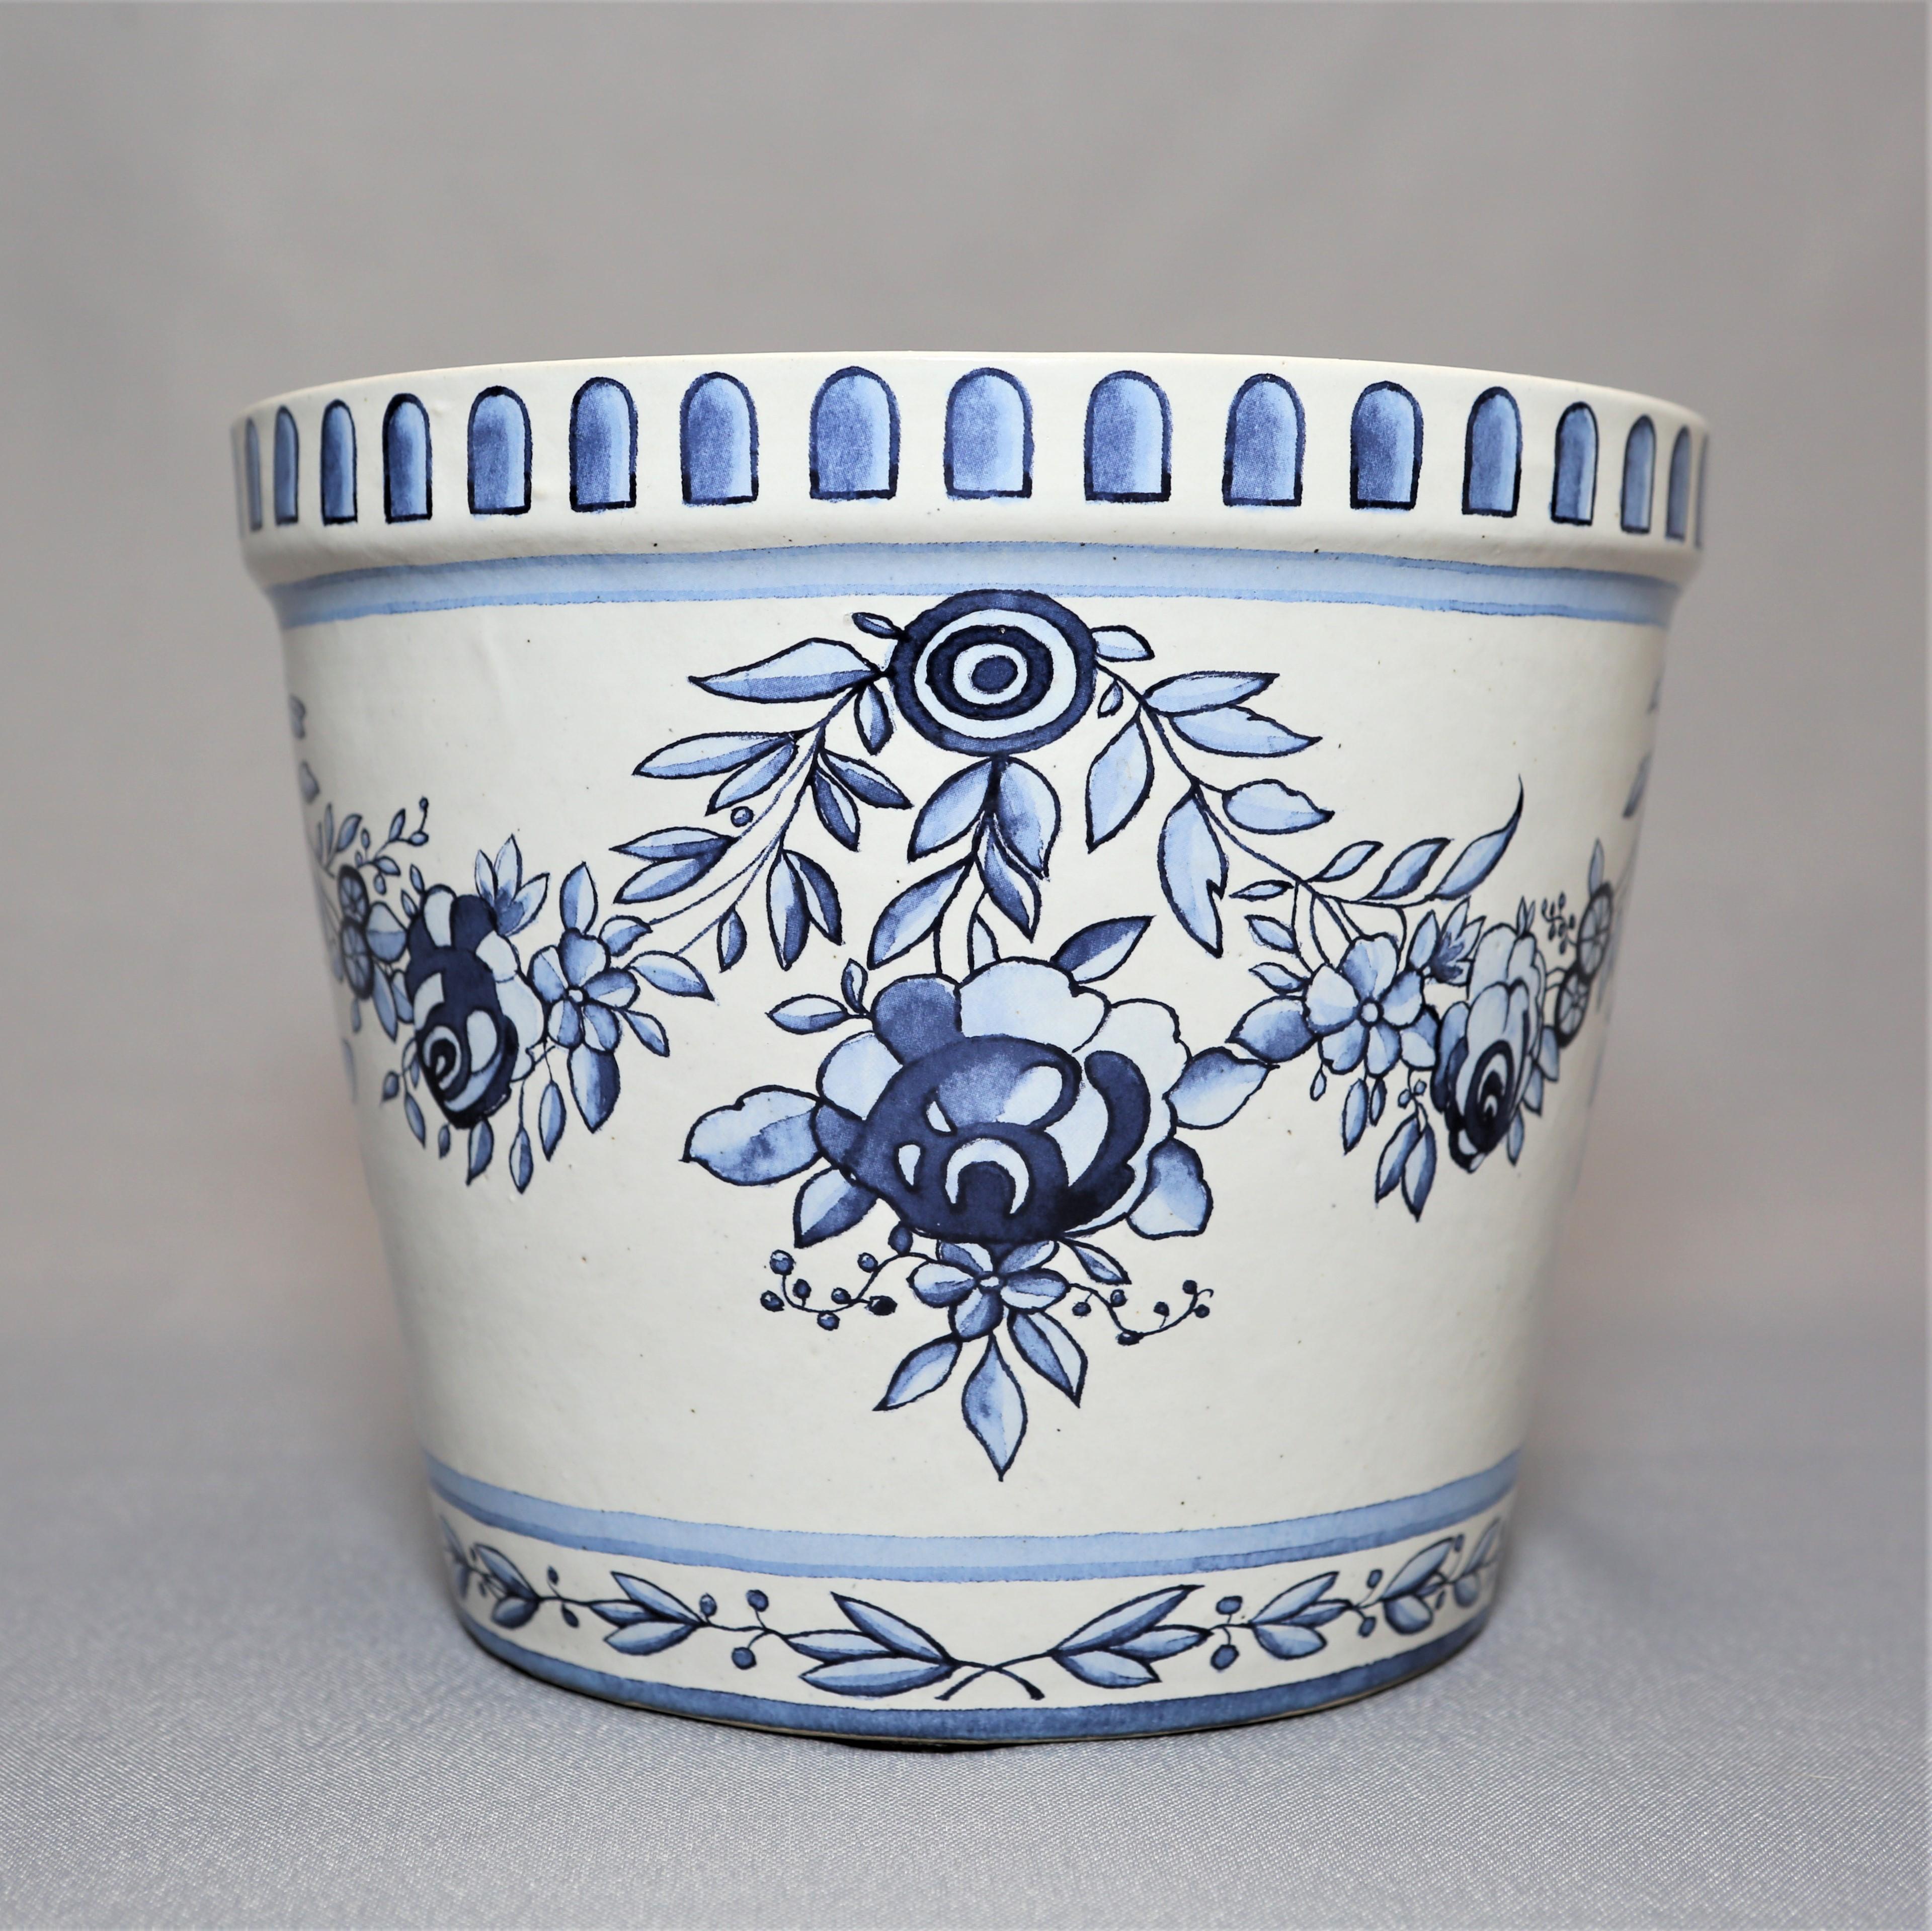 Handmade reproduction of the original 18th century Marie-Antoinette flower pot with saucer in blue and white enameled, Frost proof stoneware. Originally created for the Versailles castle gardens. Packed in a box with the Queen's monogram and a